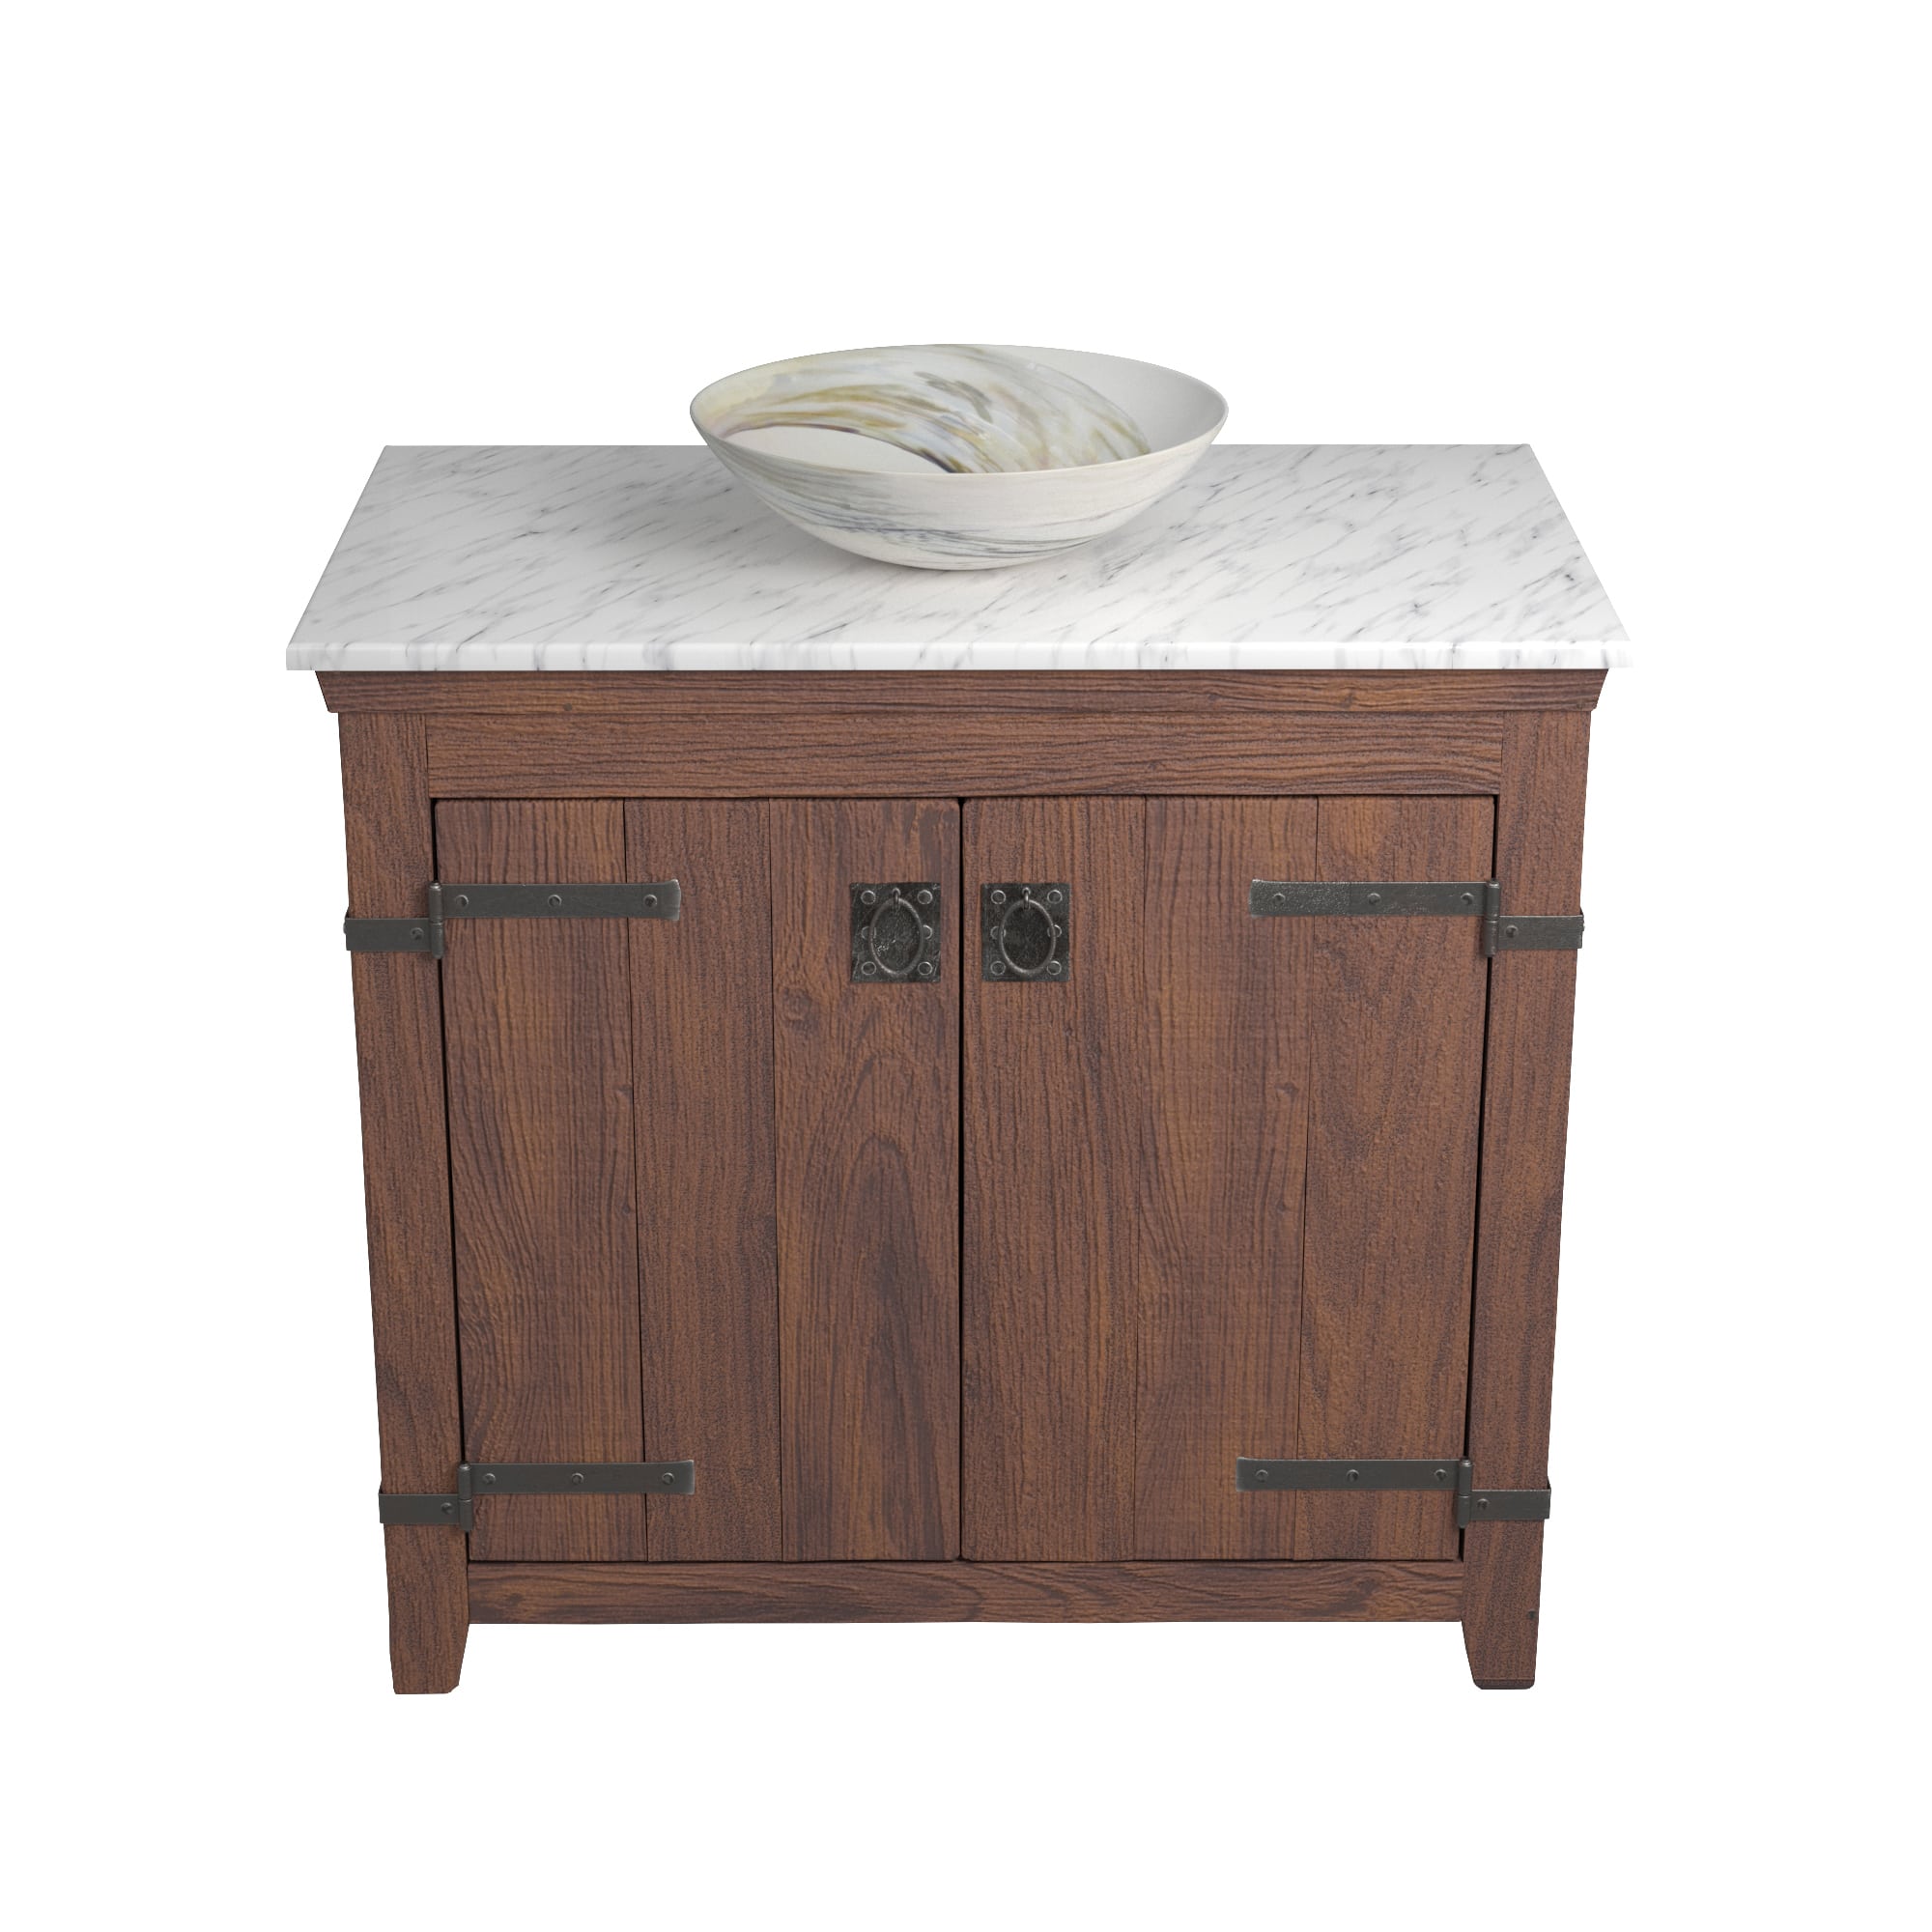 Native Trails 36" Americana Vanity in Chestnut with Carrara Marble Top and Verona in Abalone, No Faucet Hole, BND36-VB-CT-MG-060